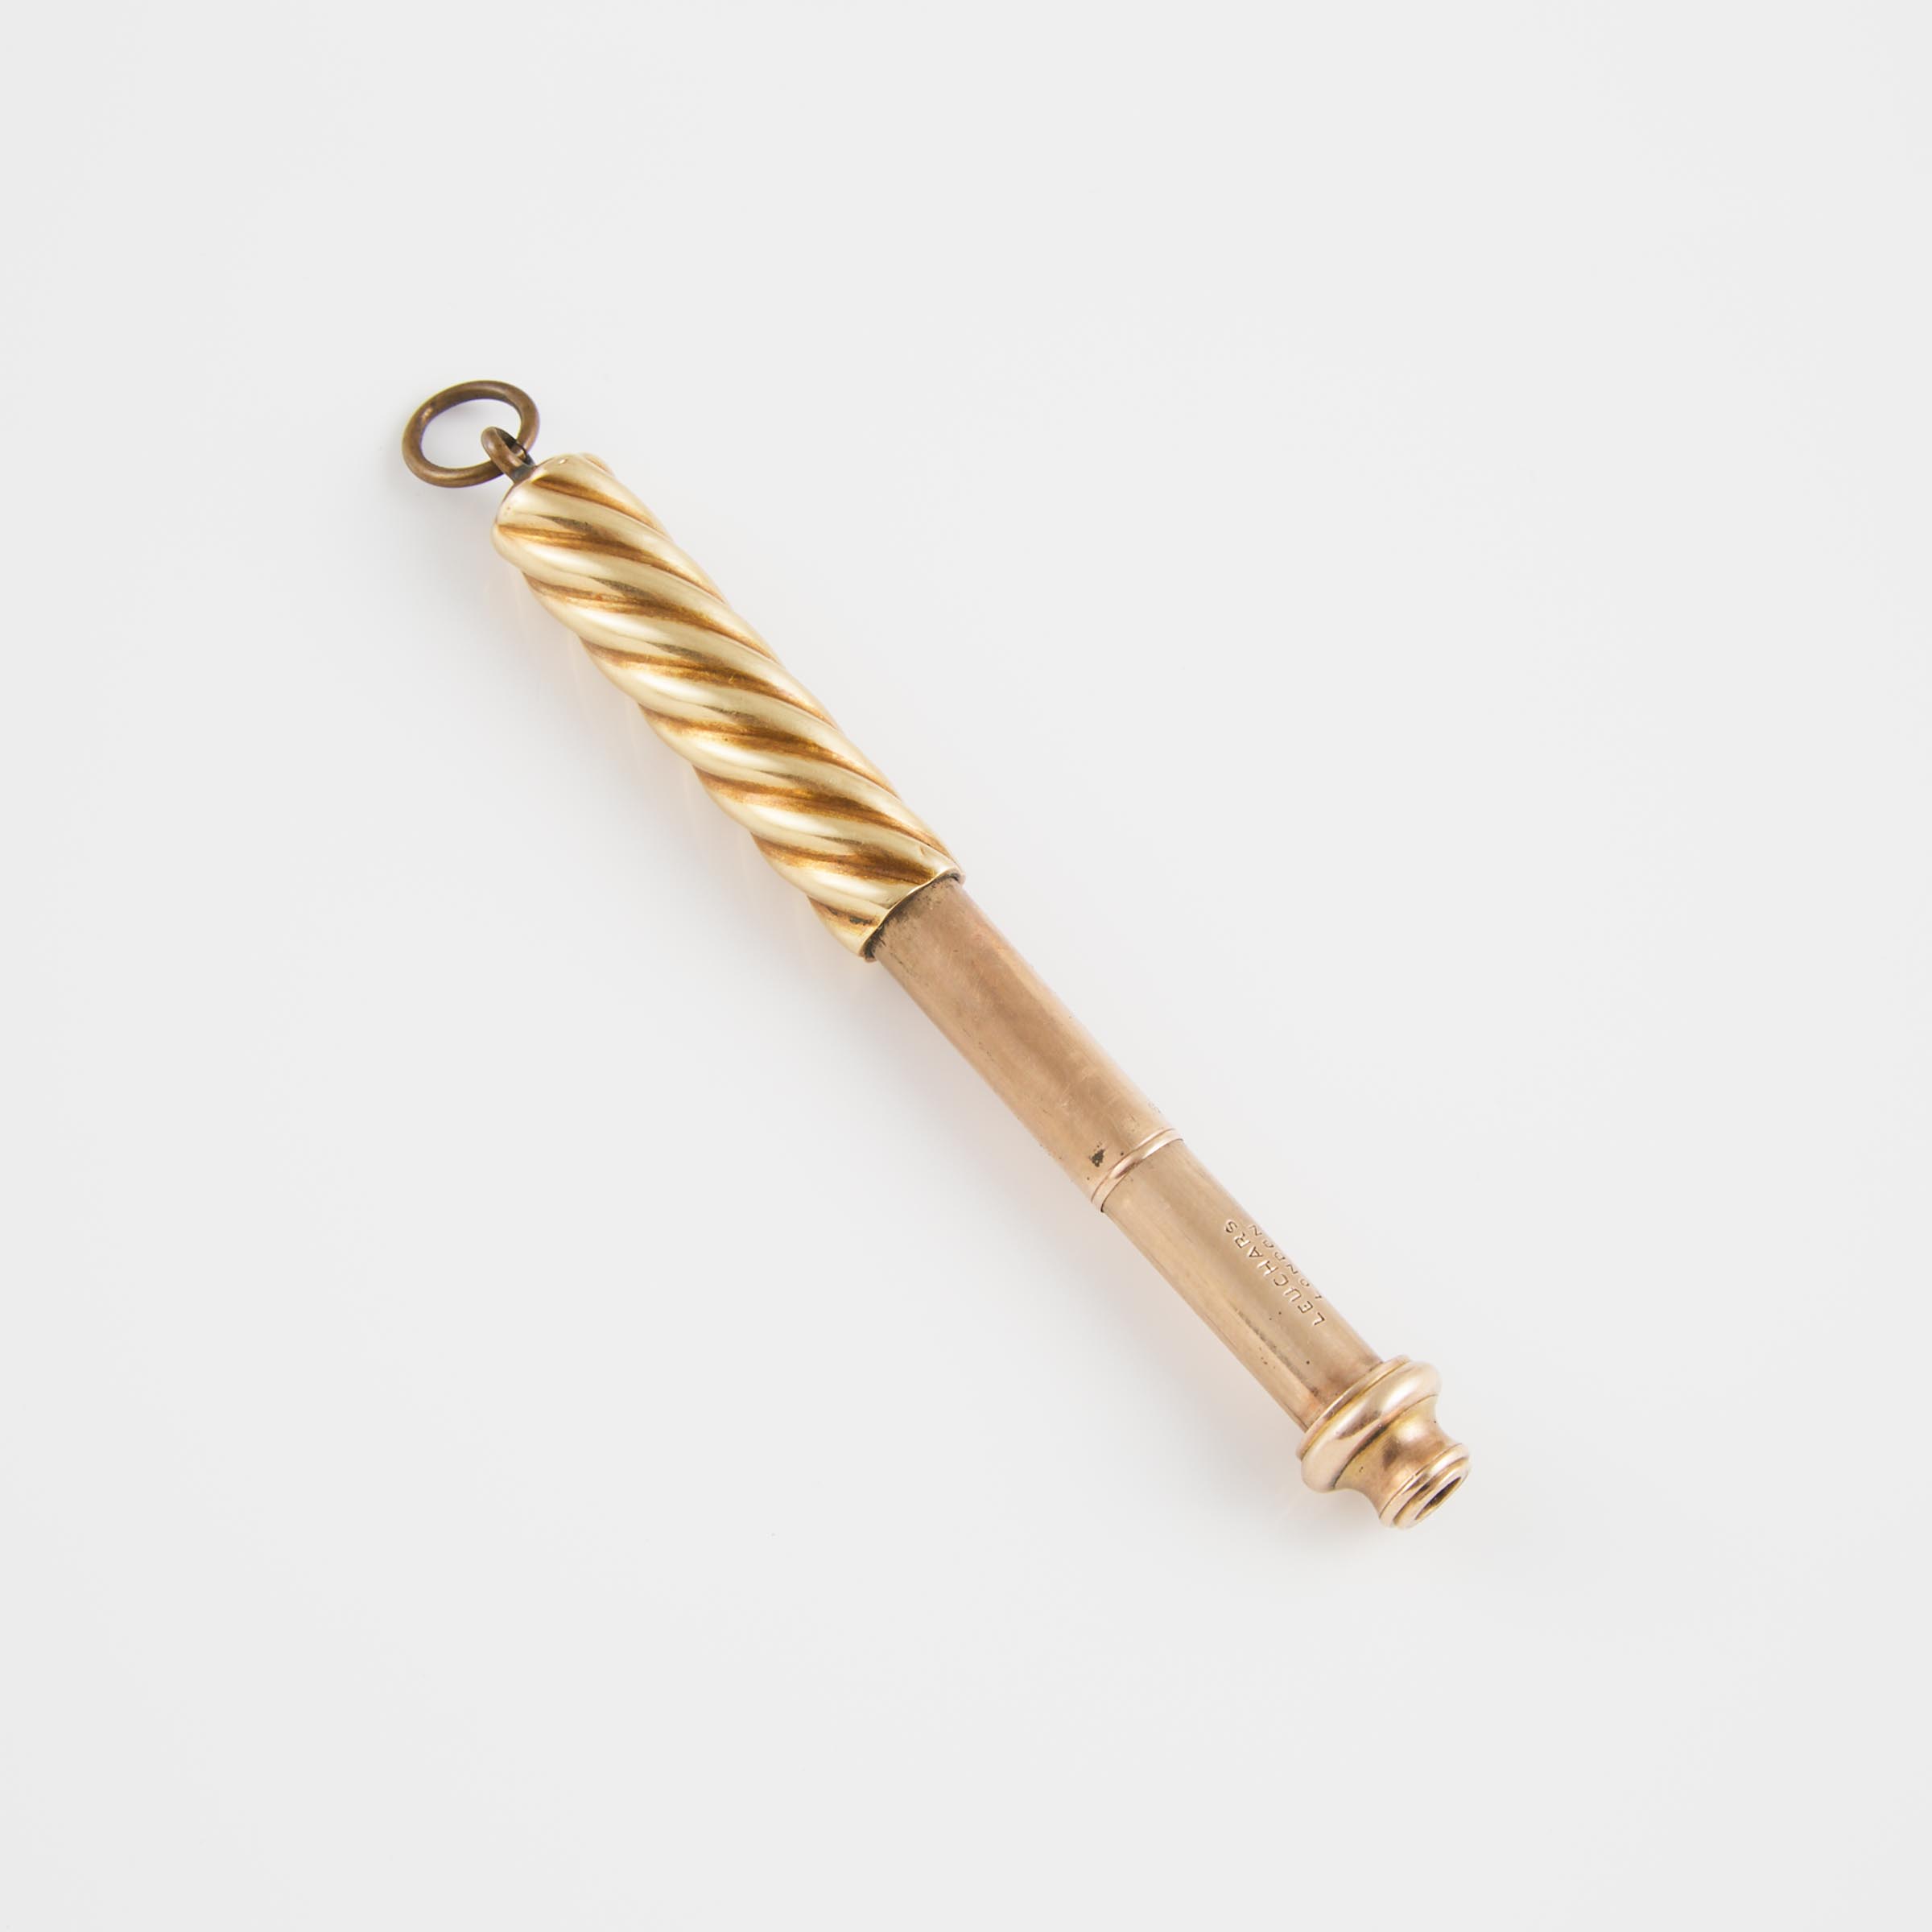 Gold And Gold-Filled Retractable Mechanical Pencil